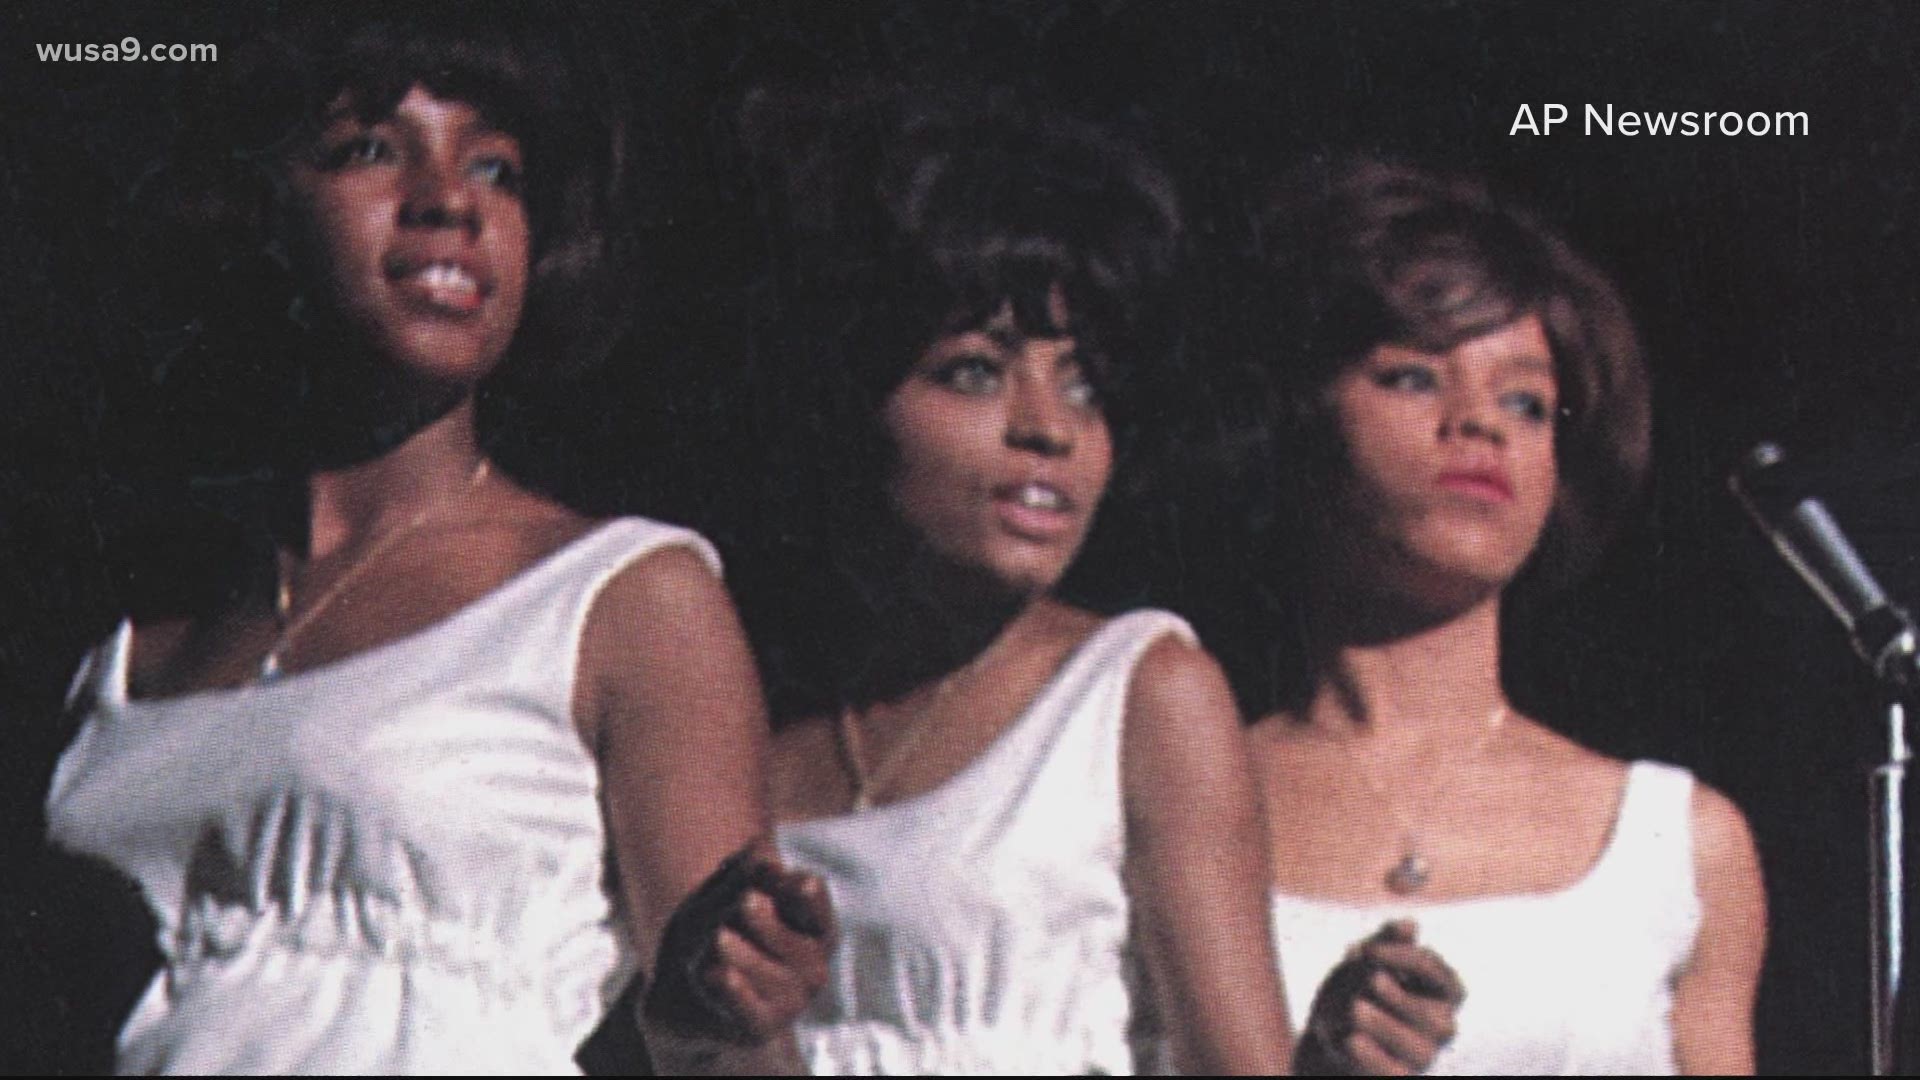 We've lost a true music icon in Mary Wilson